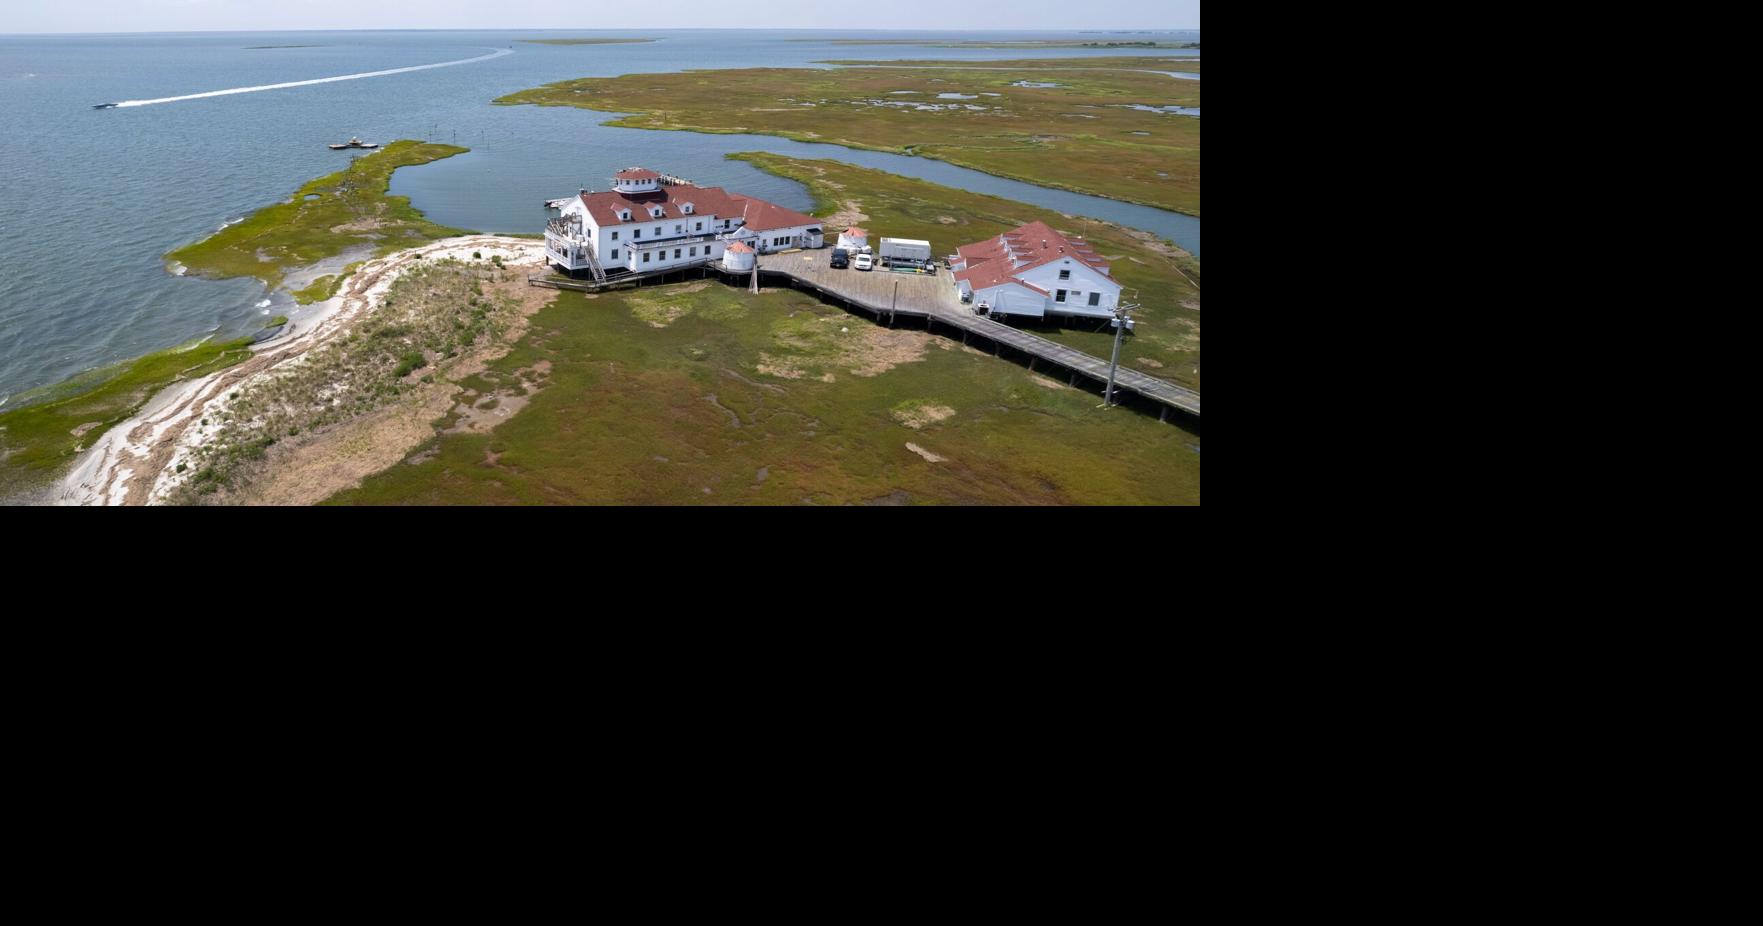 Rising sea levels will one day swallow New Jersey's climate research center